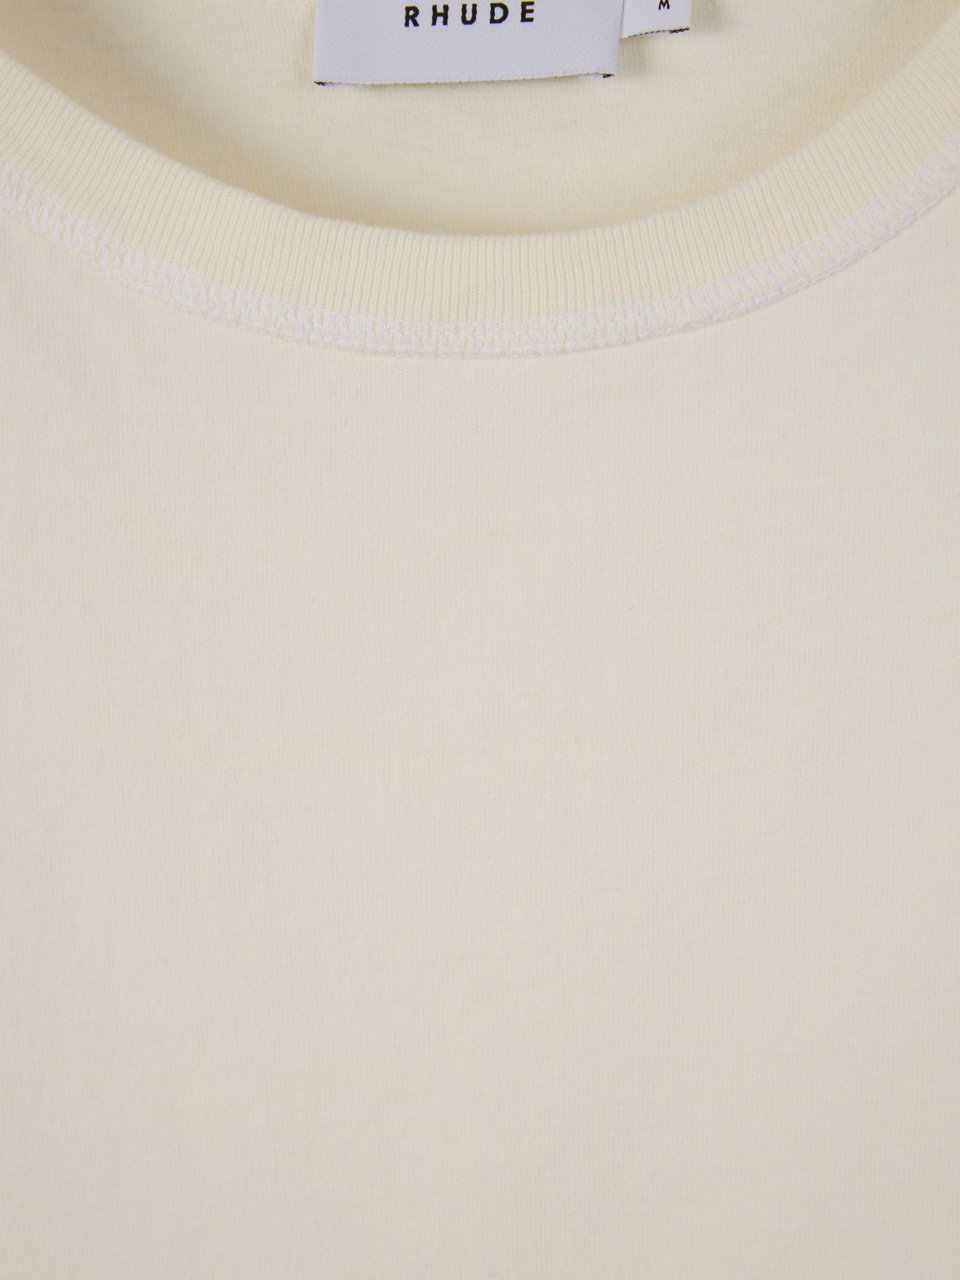 Rhude Cotton Embroidered T-Shirt Beige